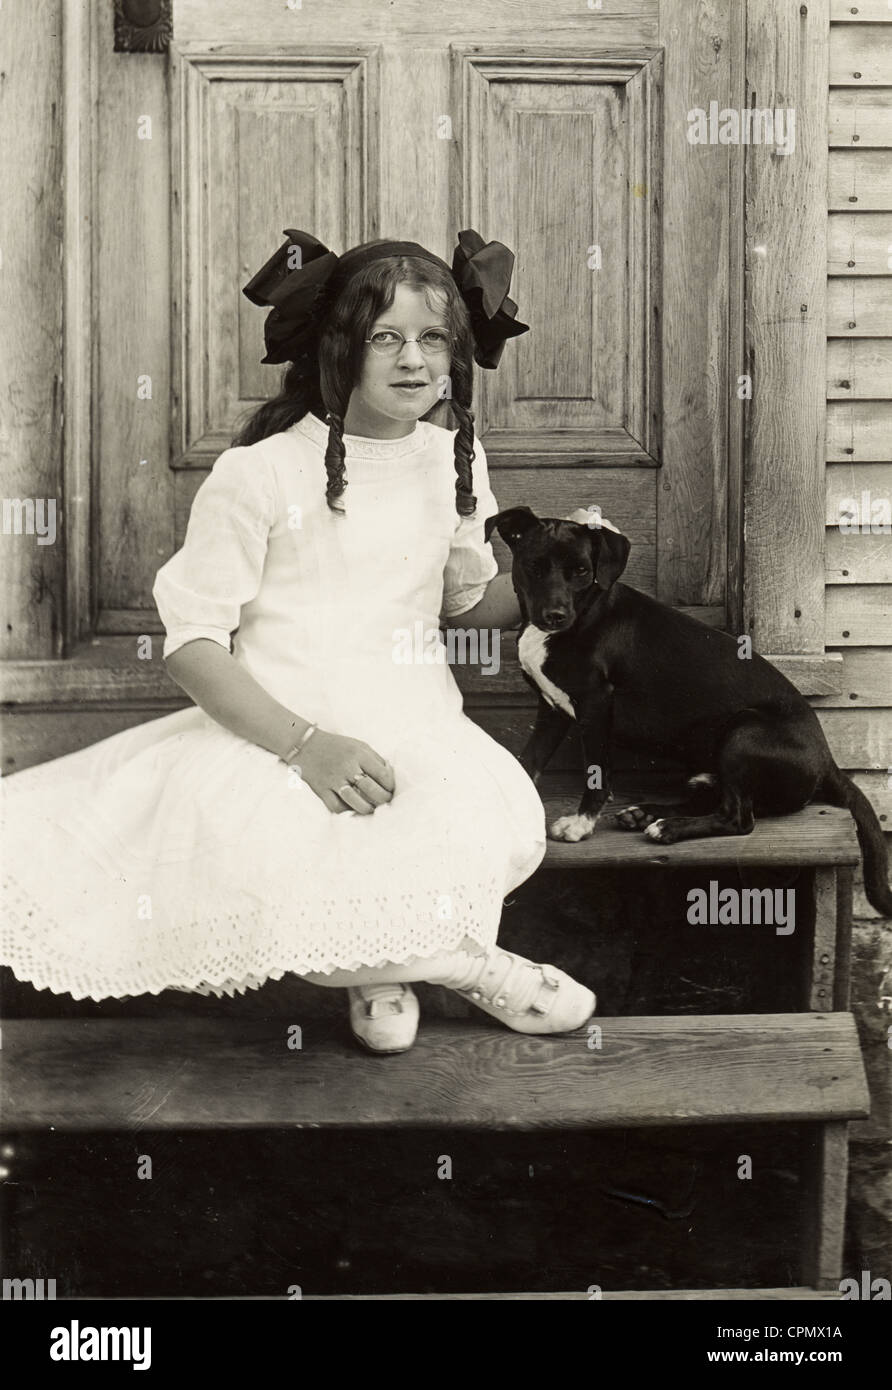 Little Girl with Glasses Sitting with Small Black Dog Stock Photo